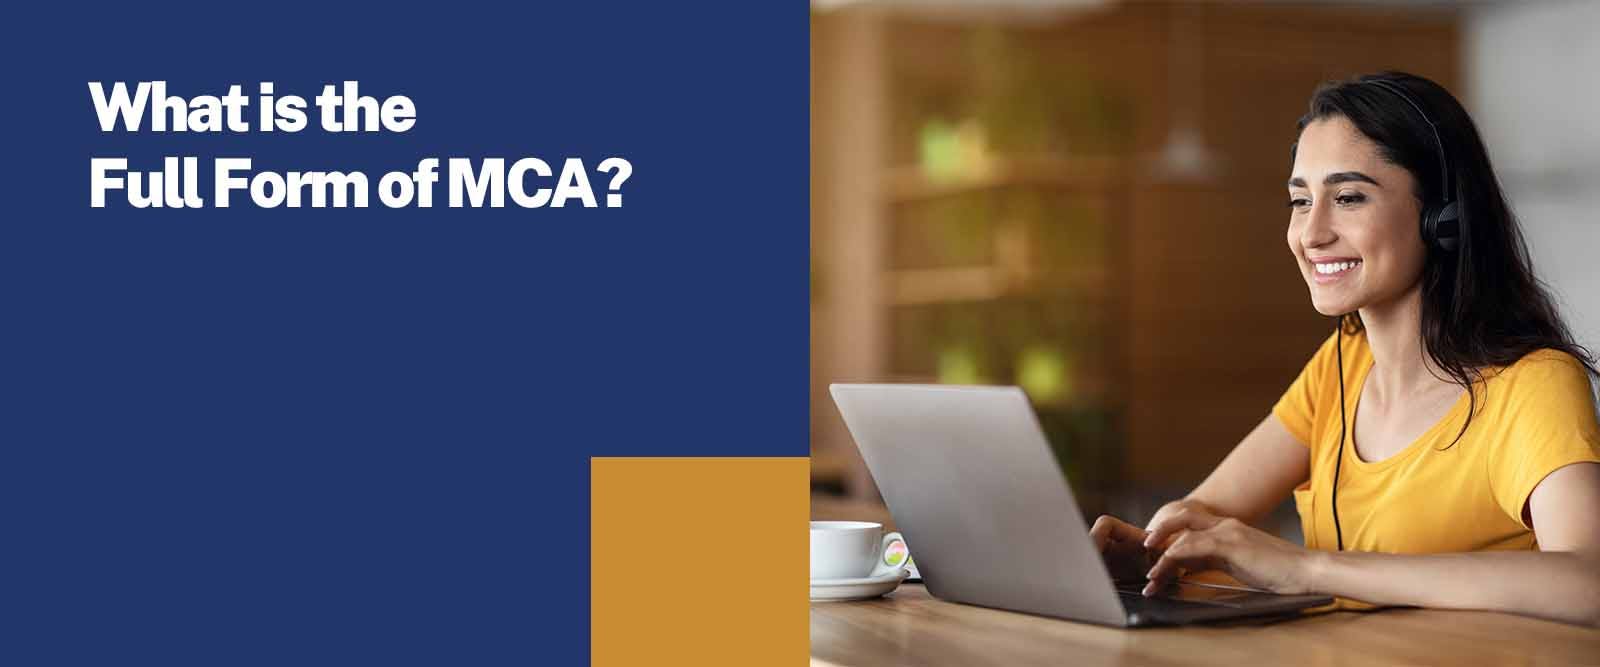 MCA Full Form - What is the Full Form of MCA